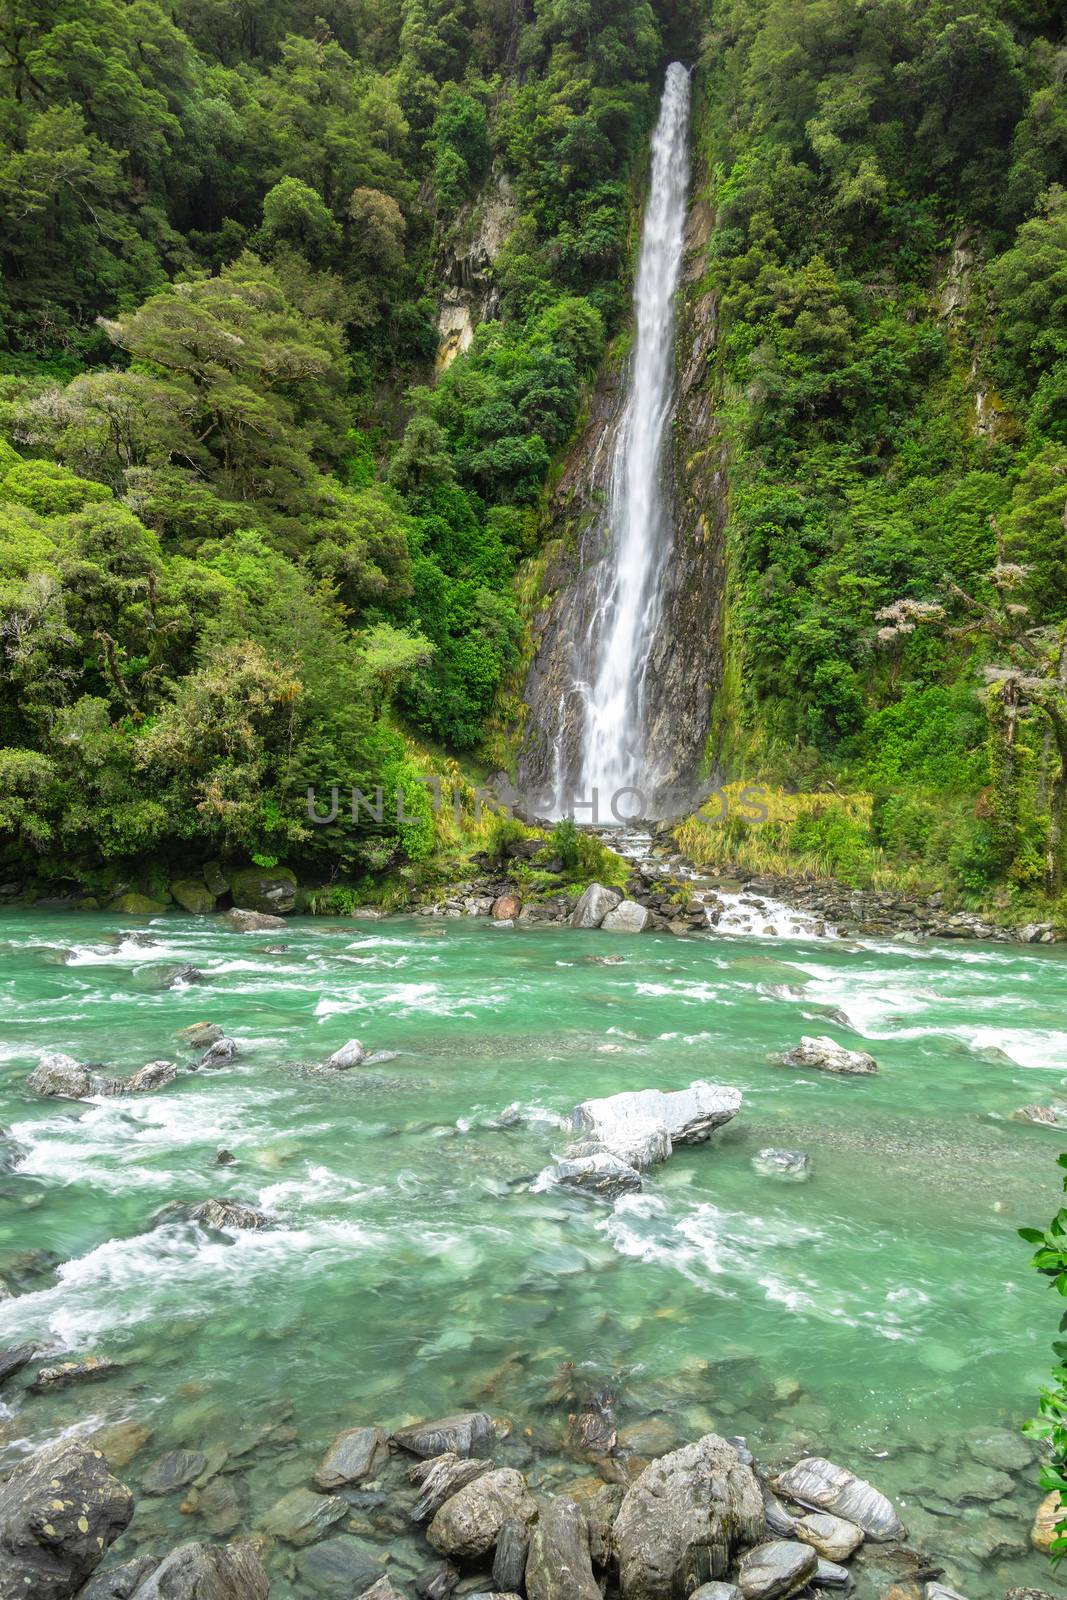 An image of the Thunder Creek Falls, New Zealand